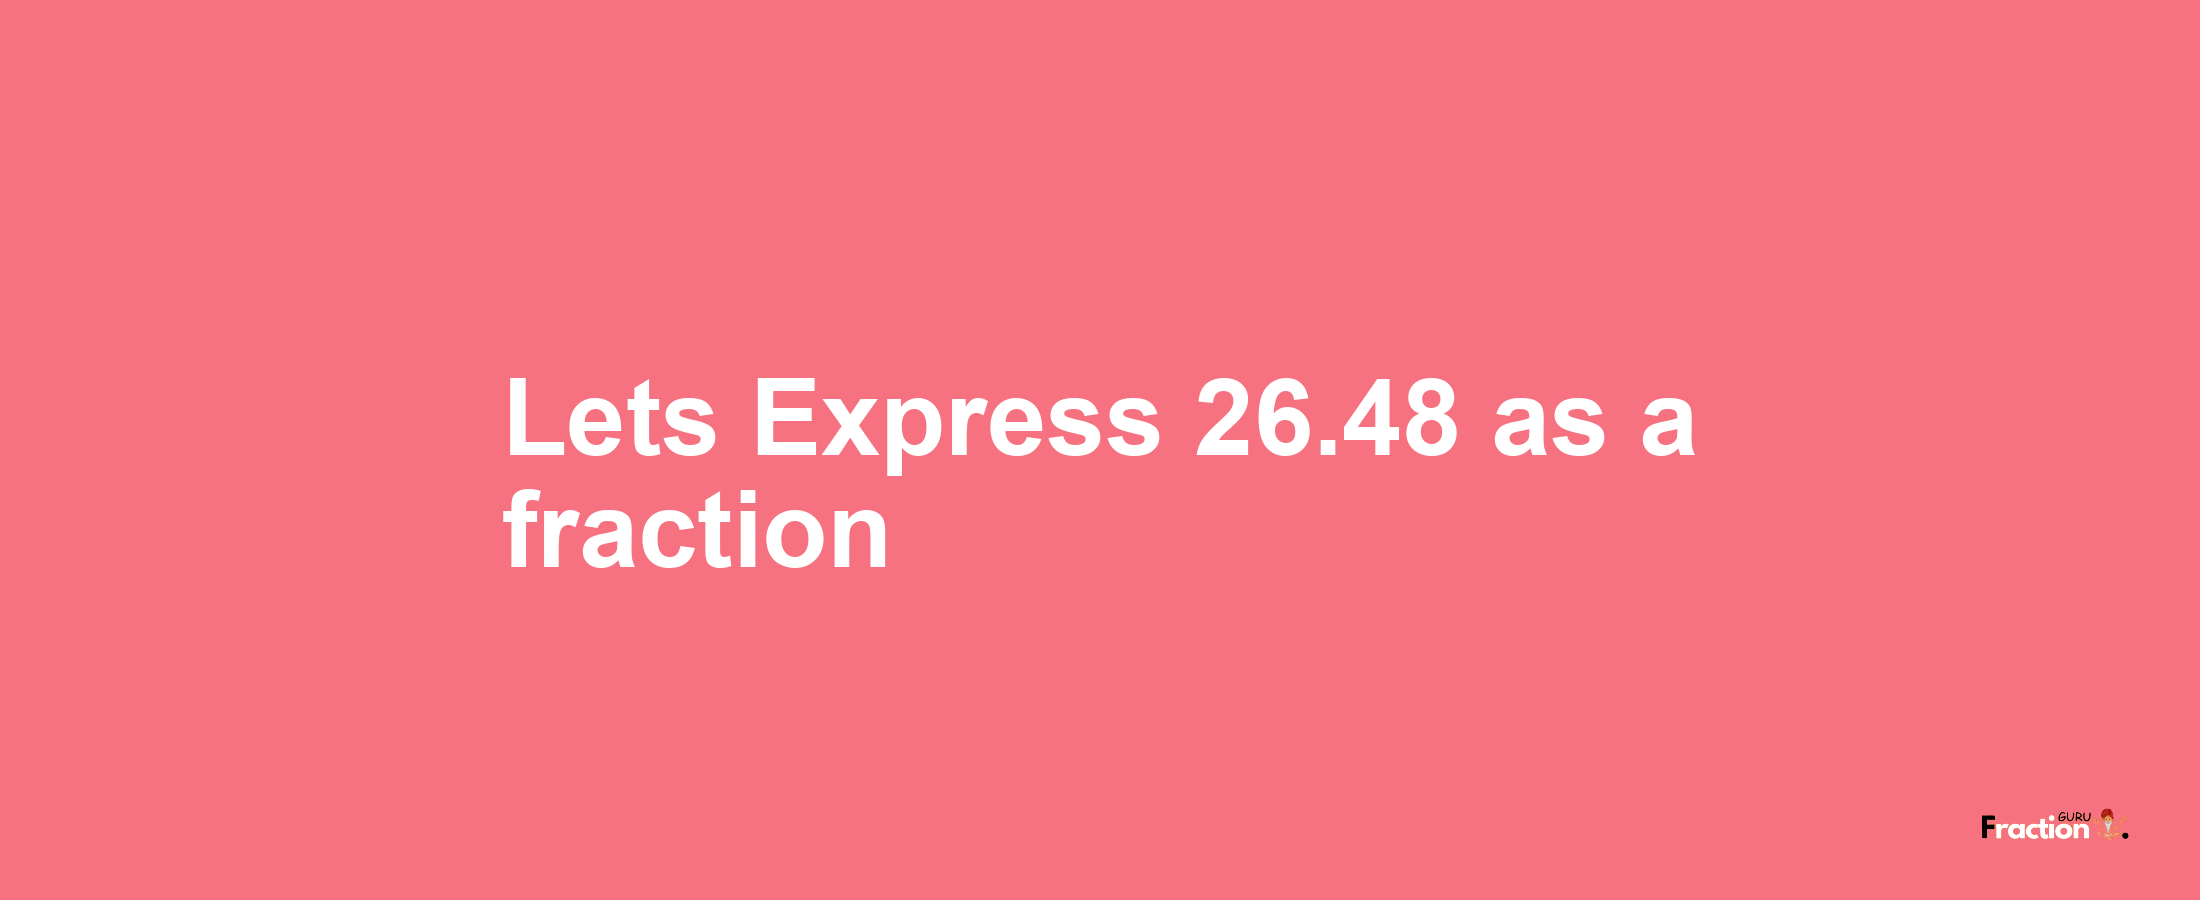 Lets Express 26.48 as afraction